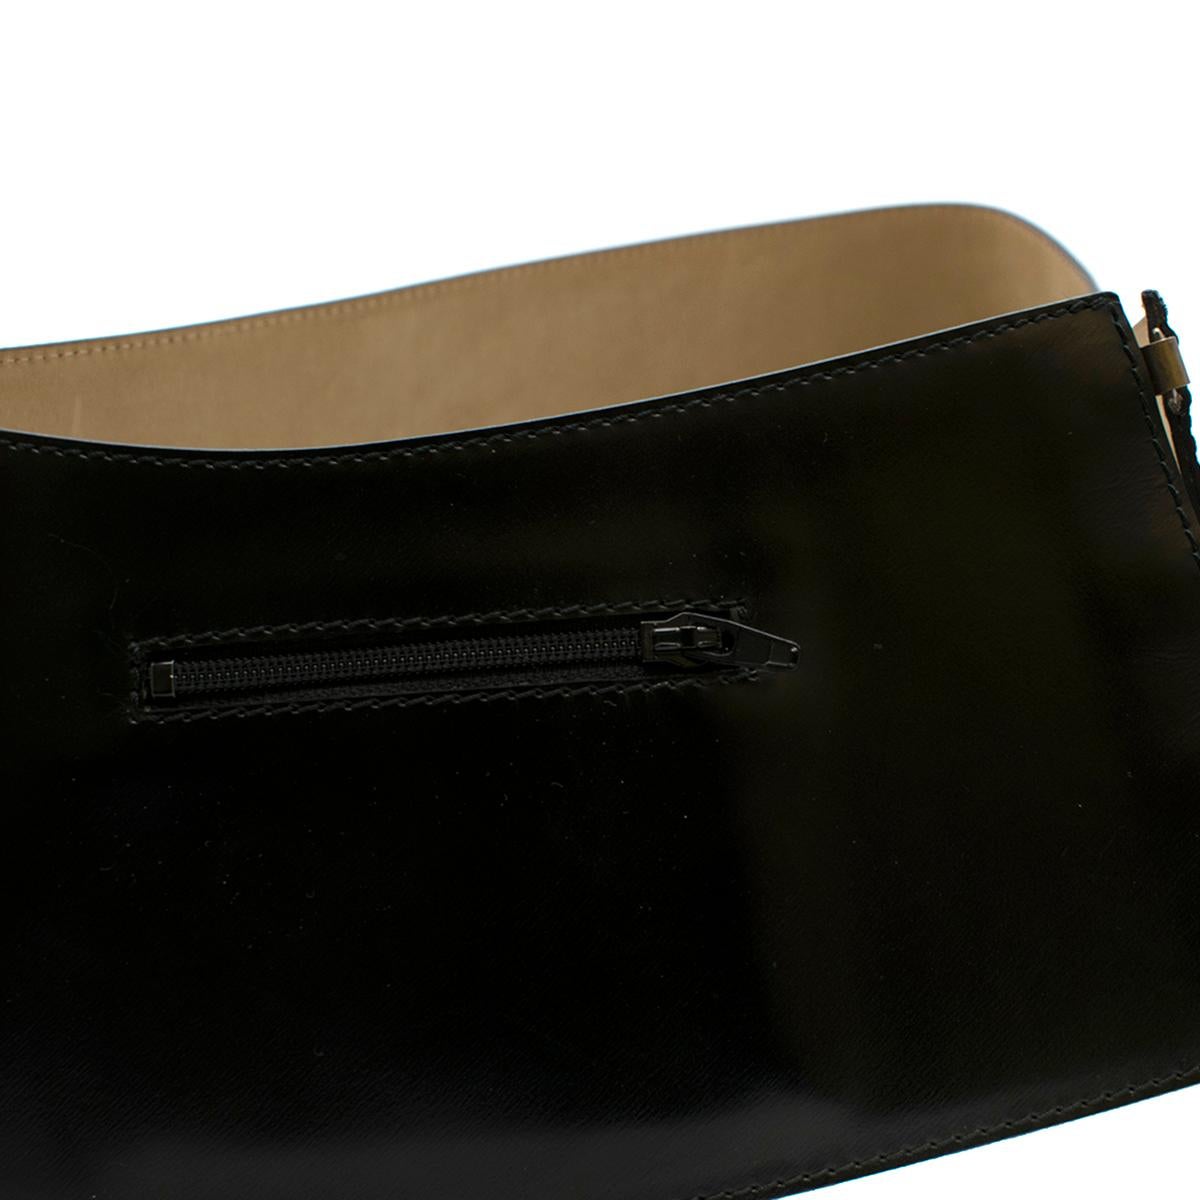 Alaia Black Wide Leather Waist Belt

- Black, wide leather waist belt
- Centre-front hook-and-eye fastening
- Front left side zip pocket
- Beige nubuck lining

Please note, these items are pre-owned and may show some signs of storage, even when